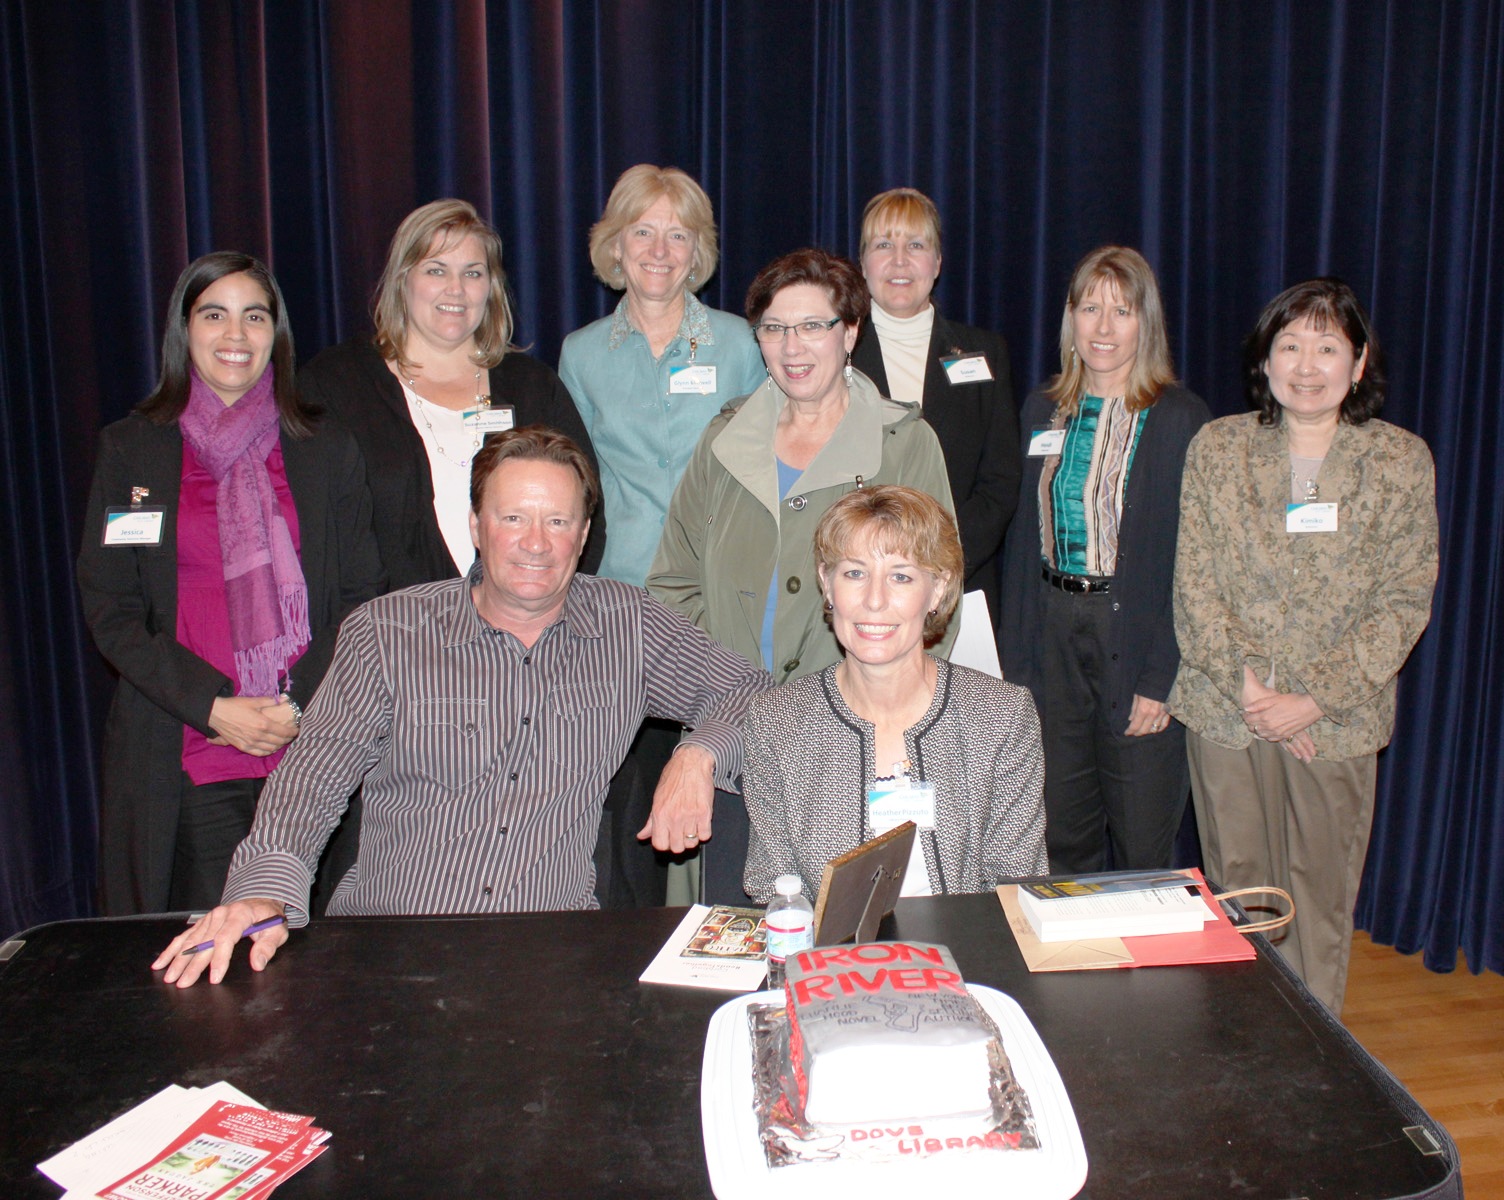  Author T. Jefferson Parker (seated left) joins staff from Carlsbad (Calif.) City Library after a talk about his book Iron River, also depicted in a book cake, during the 8th Carlsbad Reads Together event April 14.